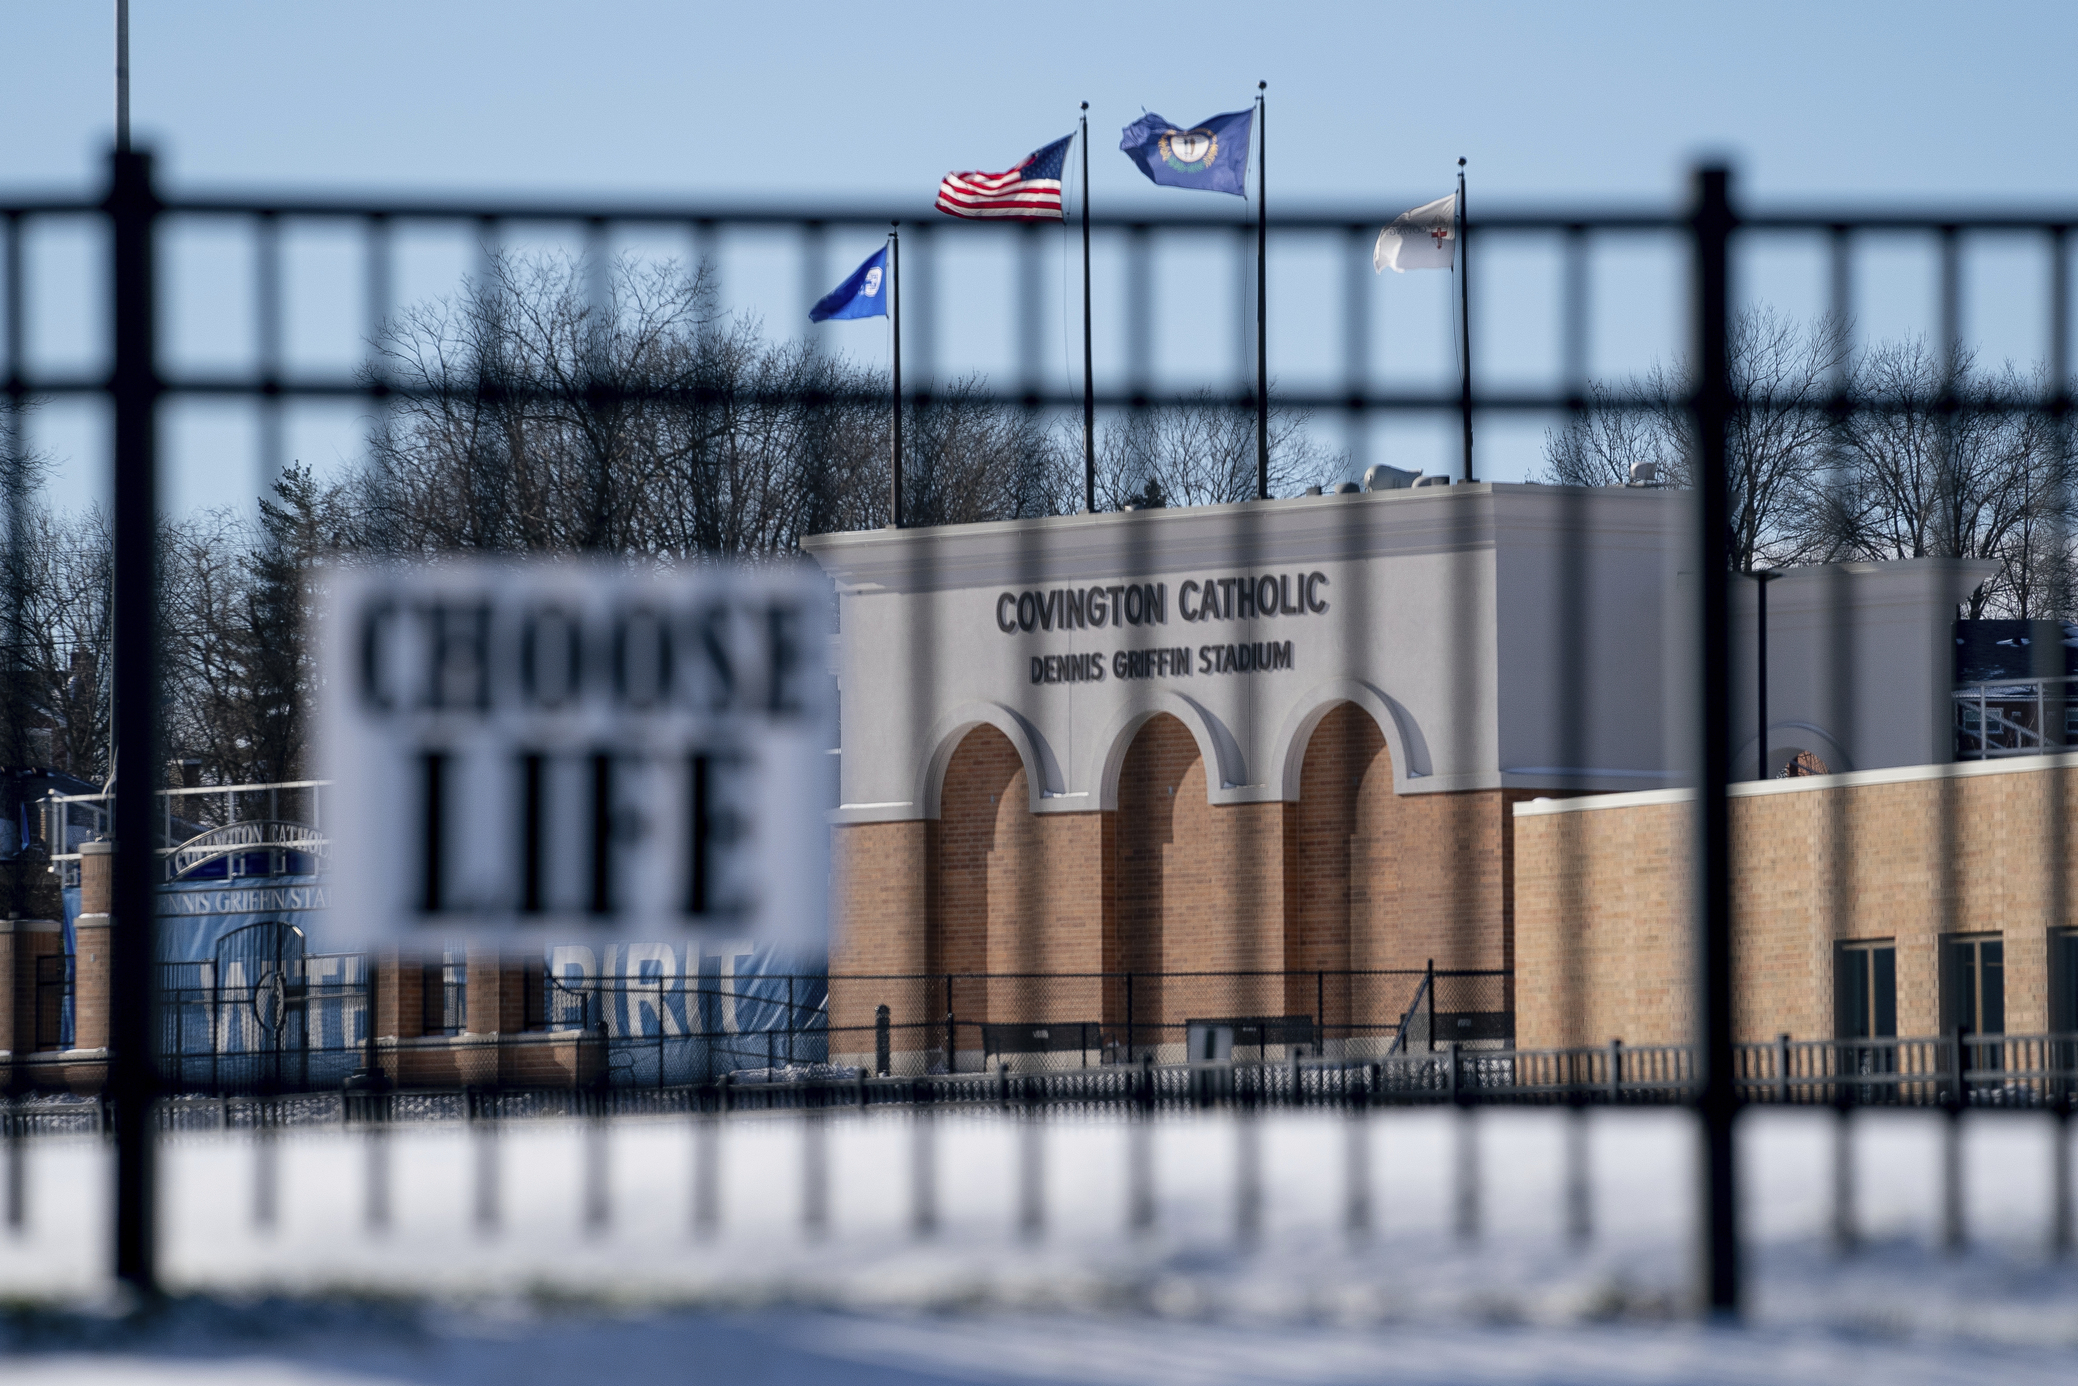 Flags fly over the Covington Catholic High School stadium in Park Kills, Ky., Sunday, Jan 20, 2019. A diocese in Kentucky has apologized after videos emerged showing students from the Catholic boys' high school mocking Native Americans outside the Li